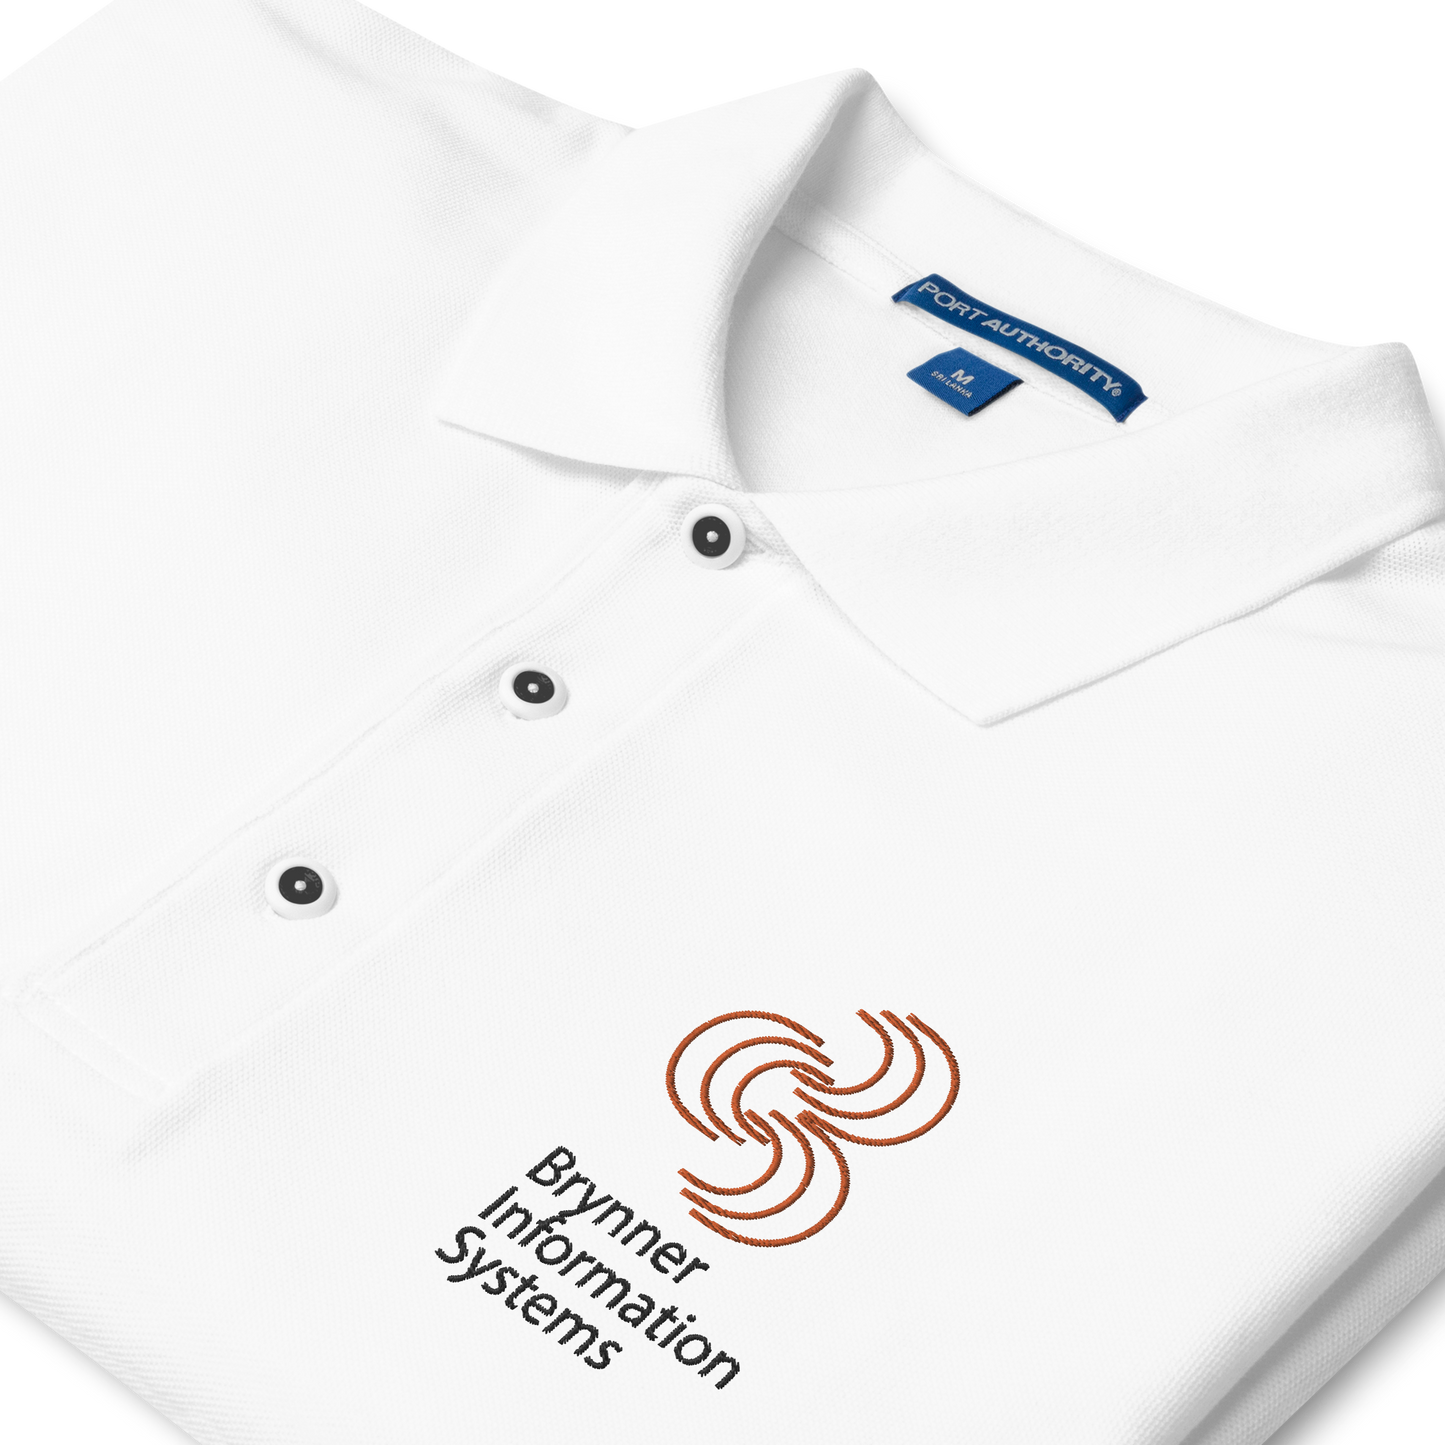 The Brynner Information Systems Polo